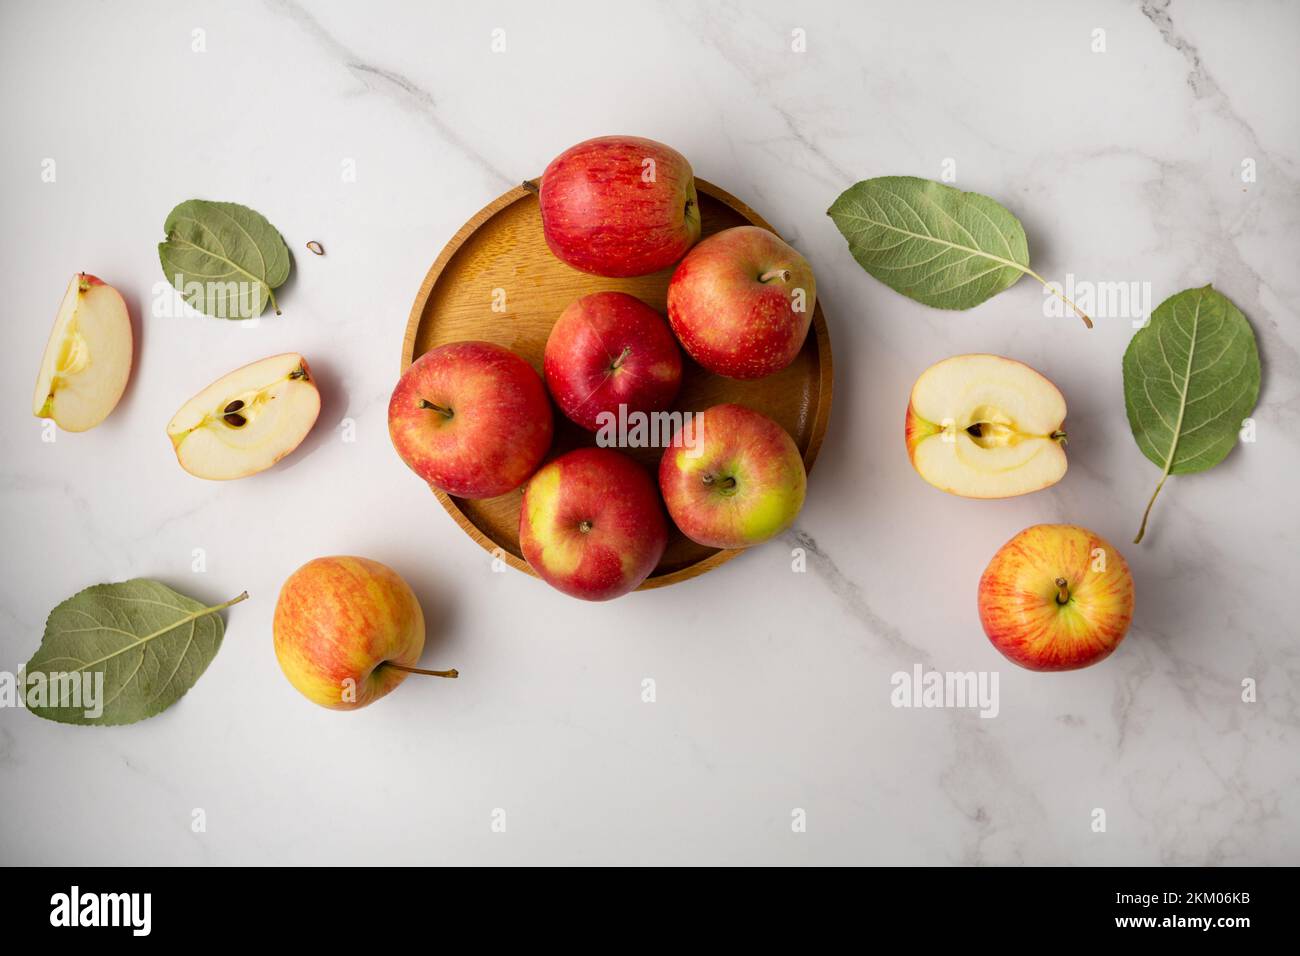 Fresh red and yellow apples on plate healthy food on light surface top view Stock Photo